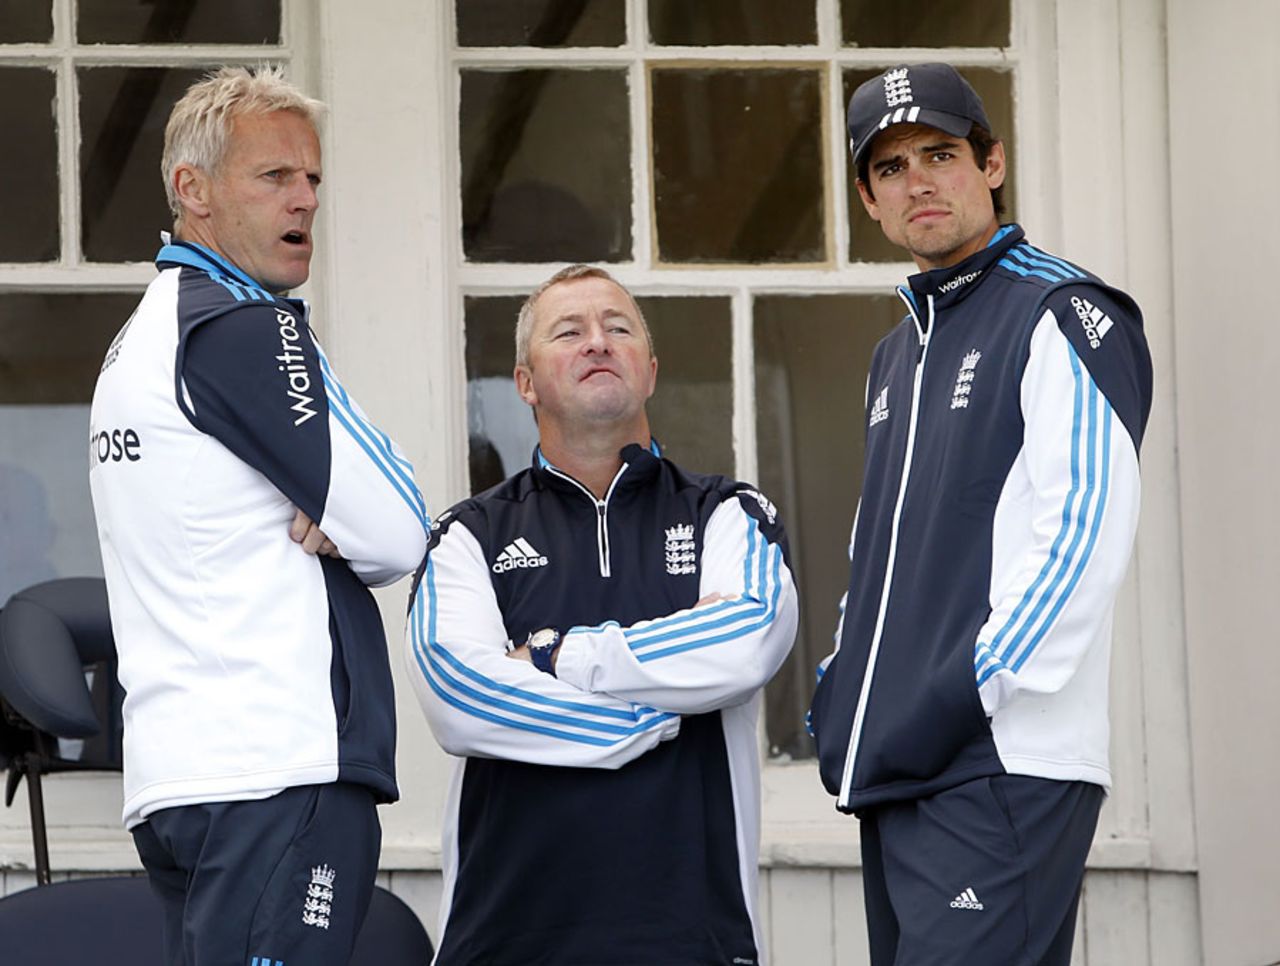 Running the show: Peter Moores, Paul Farbrace and Alastair Cook, Scotland v England, only ODI, Aberdeen, May 9, 2014